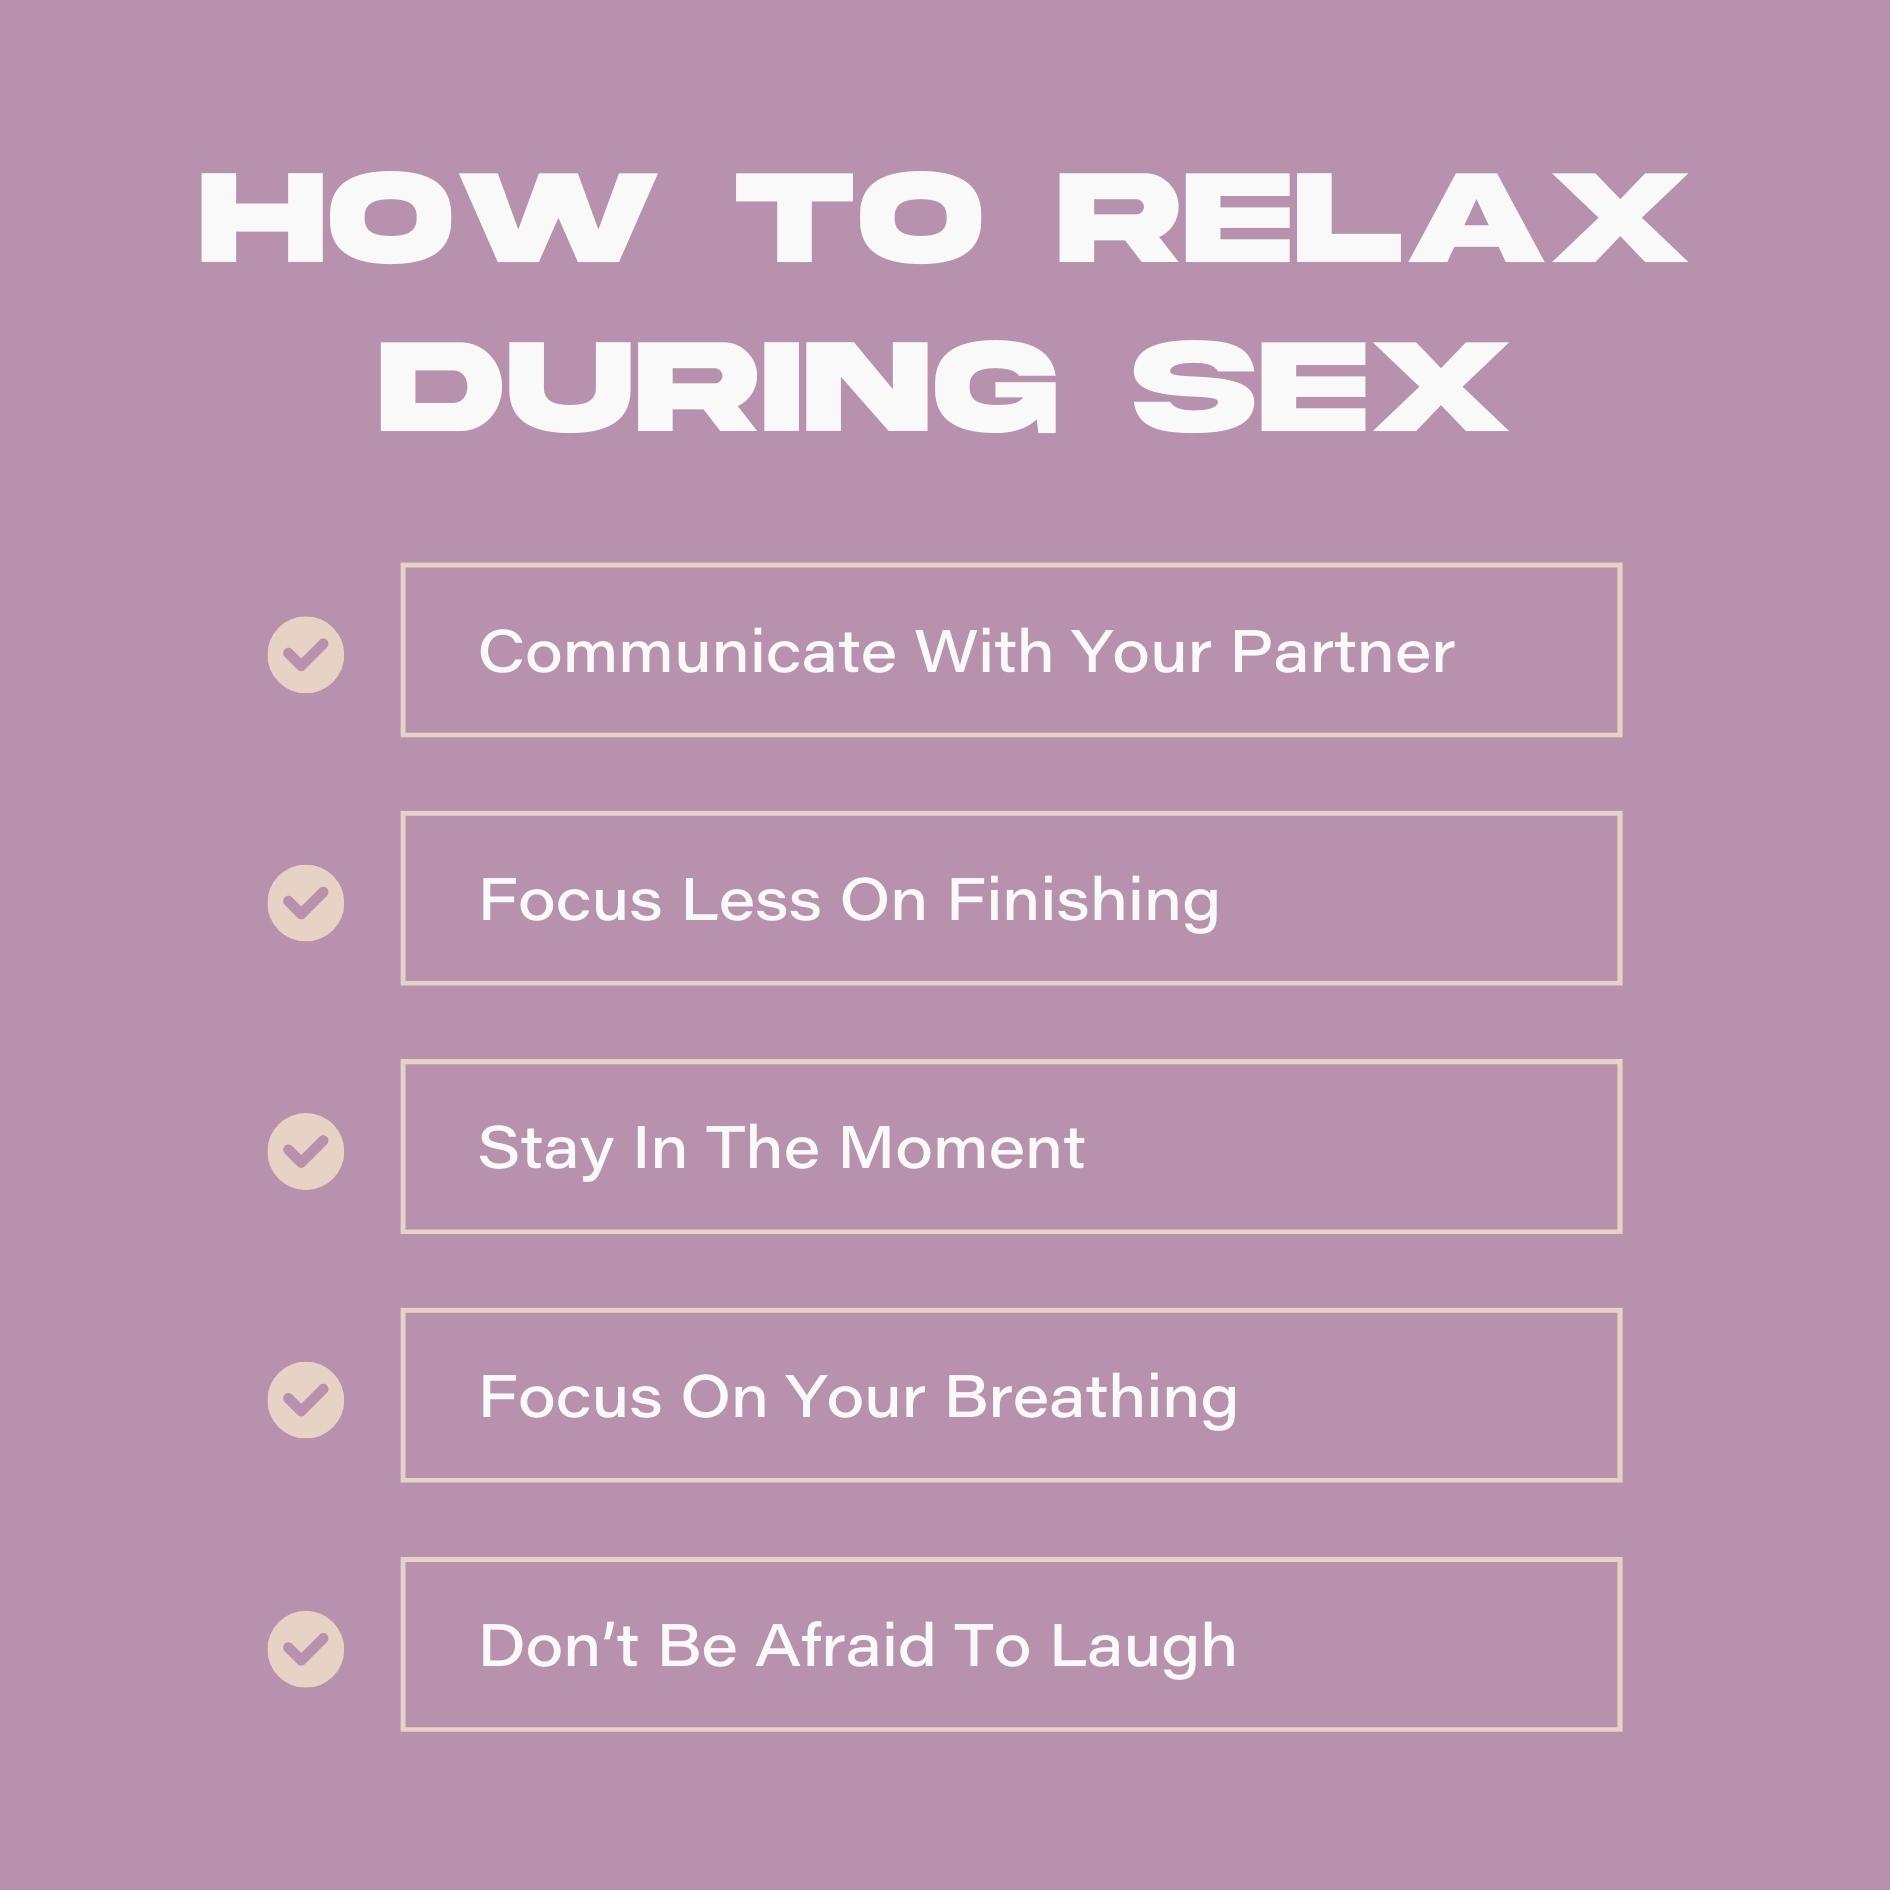 List of Ways on How To Relax During Sex